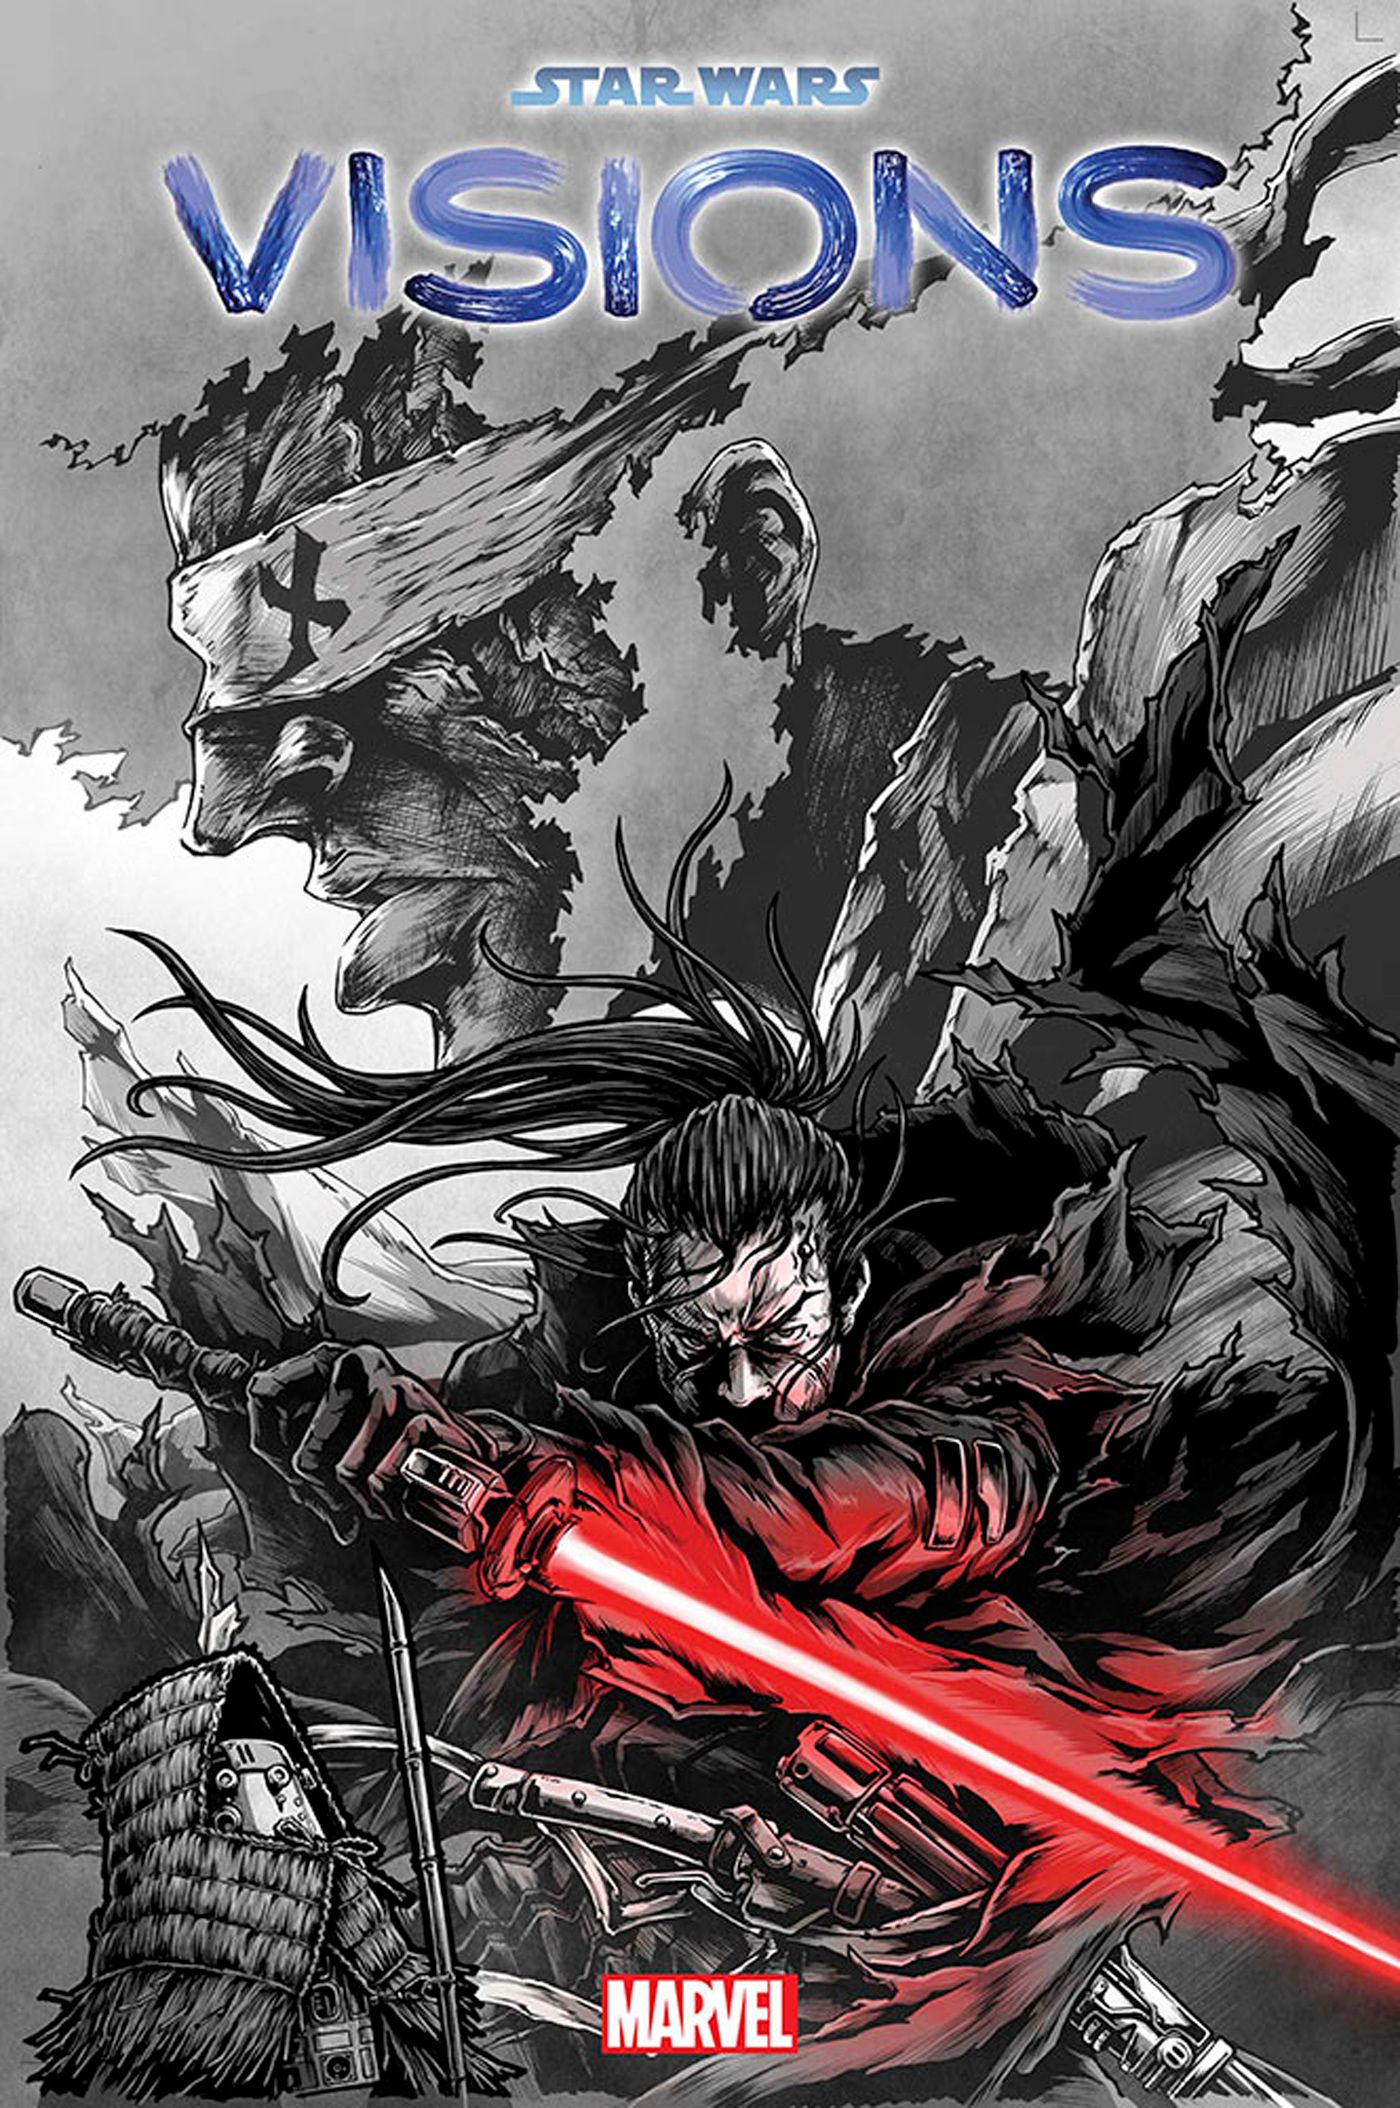 Star Wars Visions 1 Cover